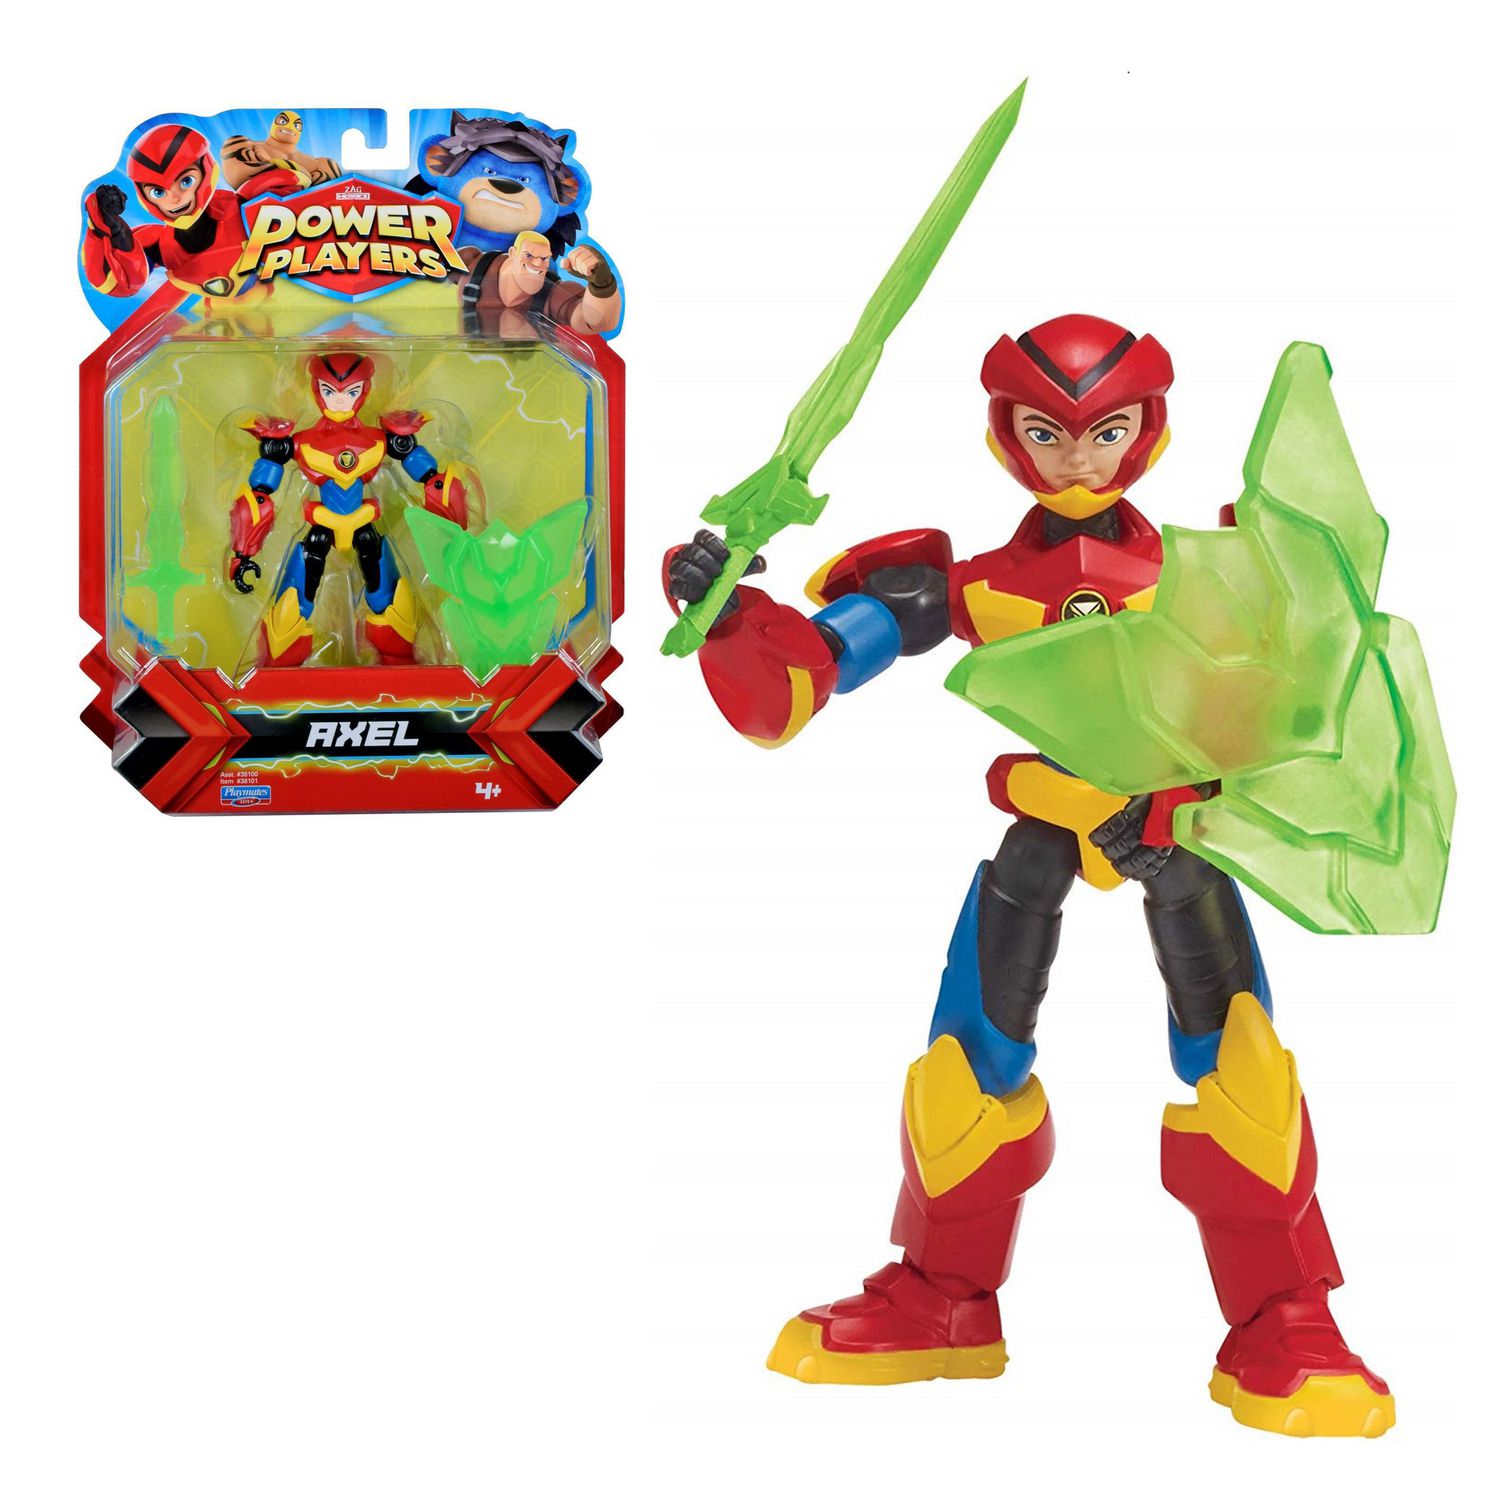 Power Players - 5 Action Figure 